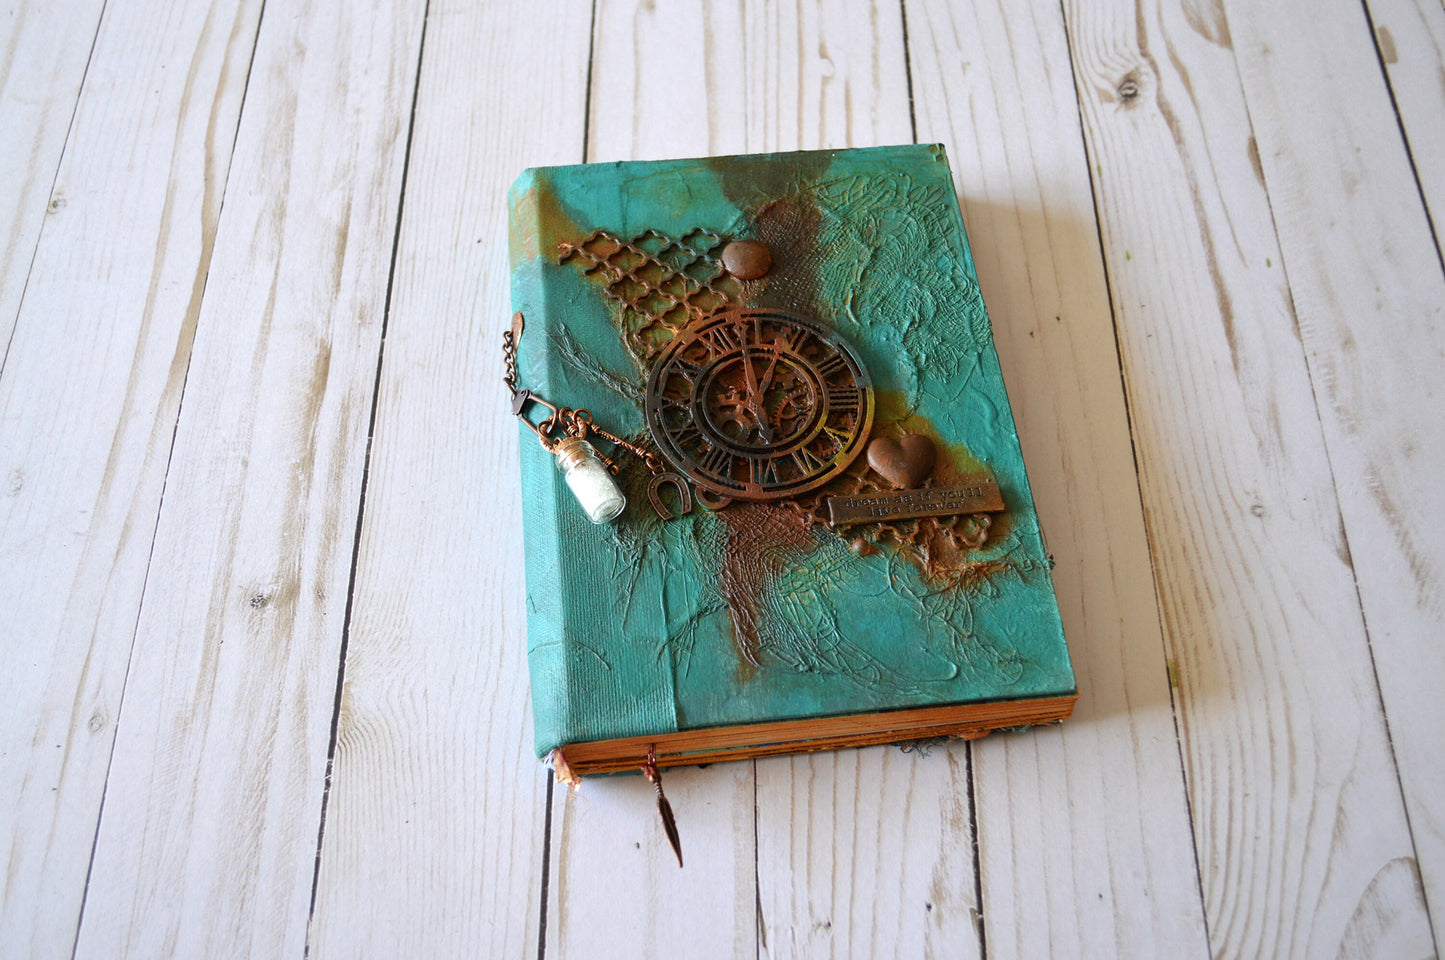 Steampunk Junk Journal Diary book with decorated pages, Industrial Wedding Guest Book, Scrapbook Album, Memory Keeping Gift for Writer Poet